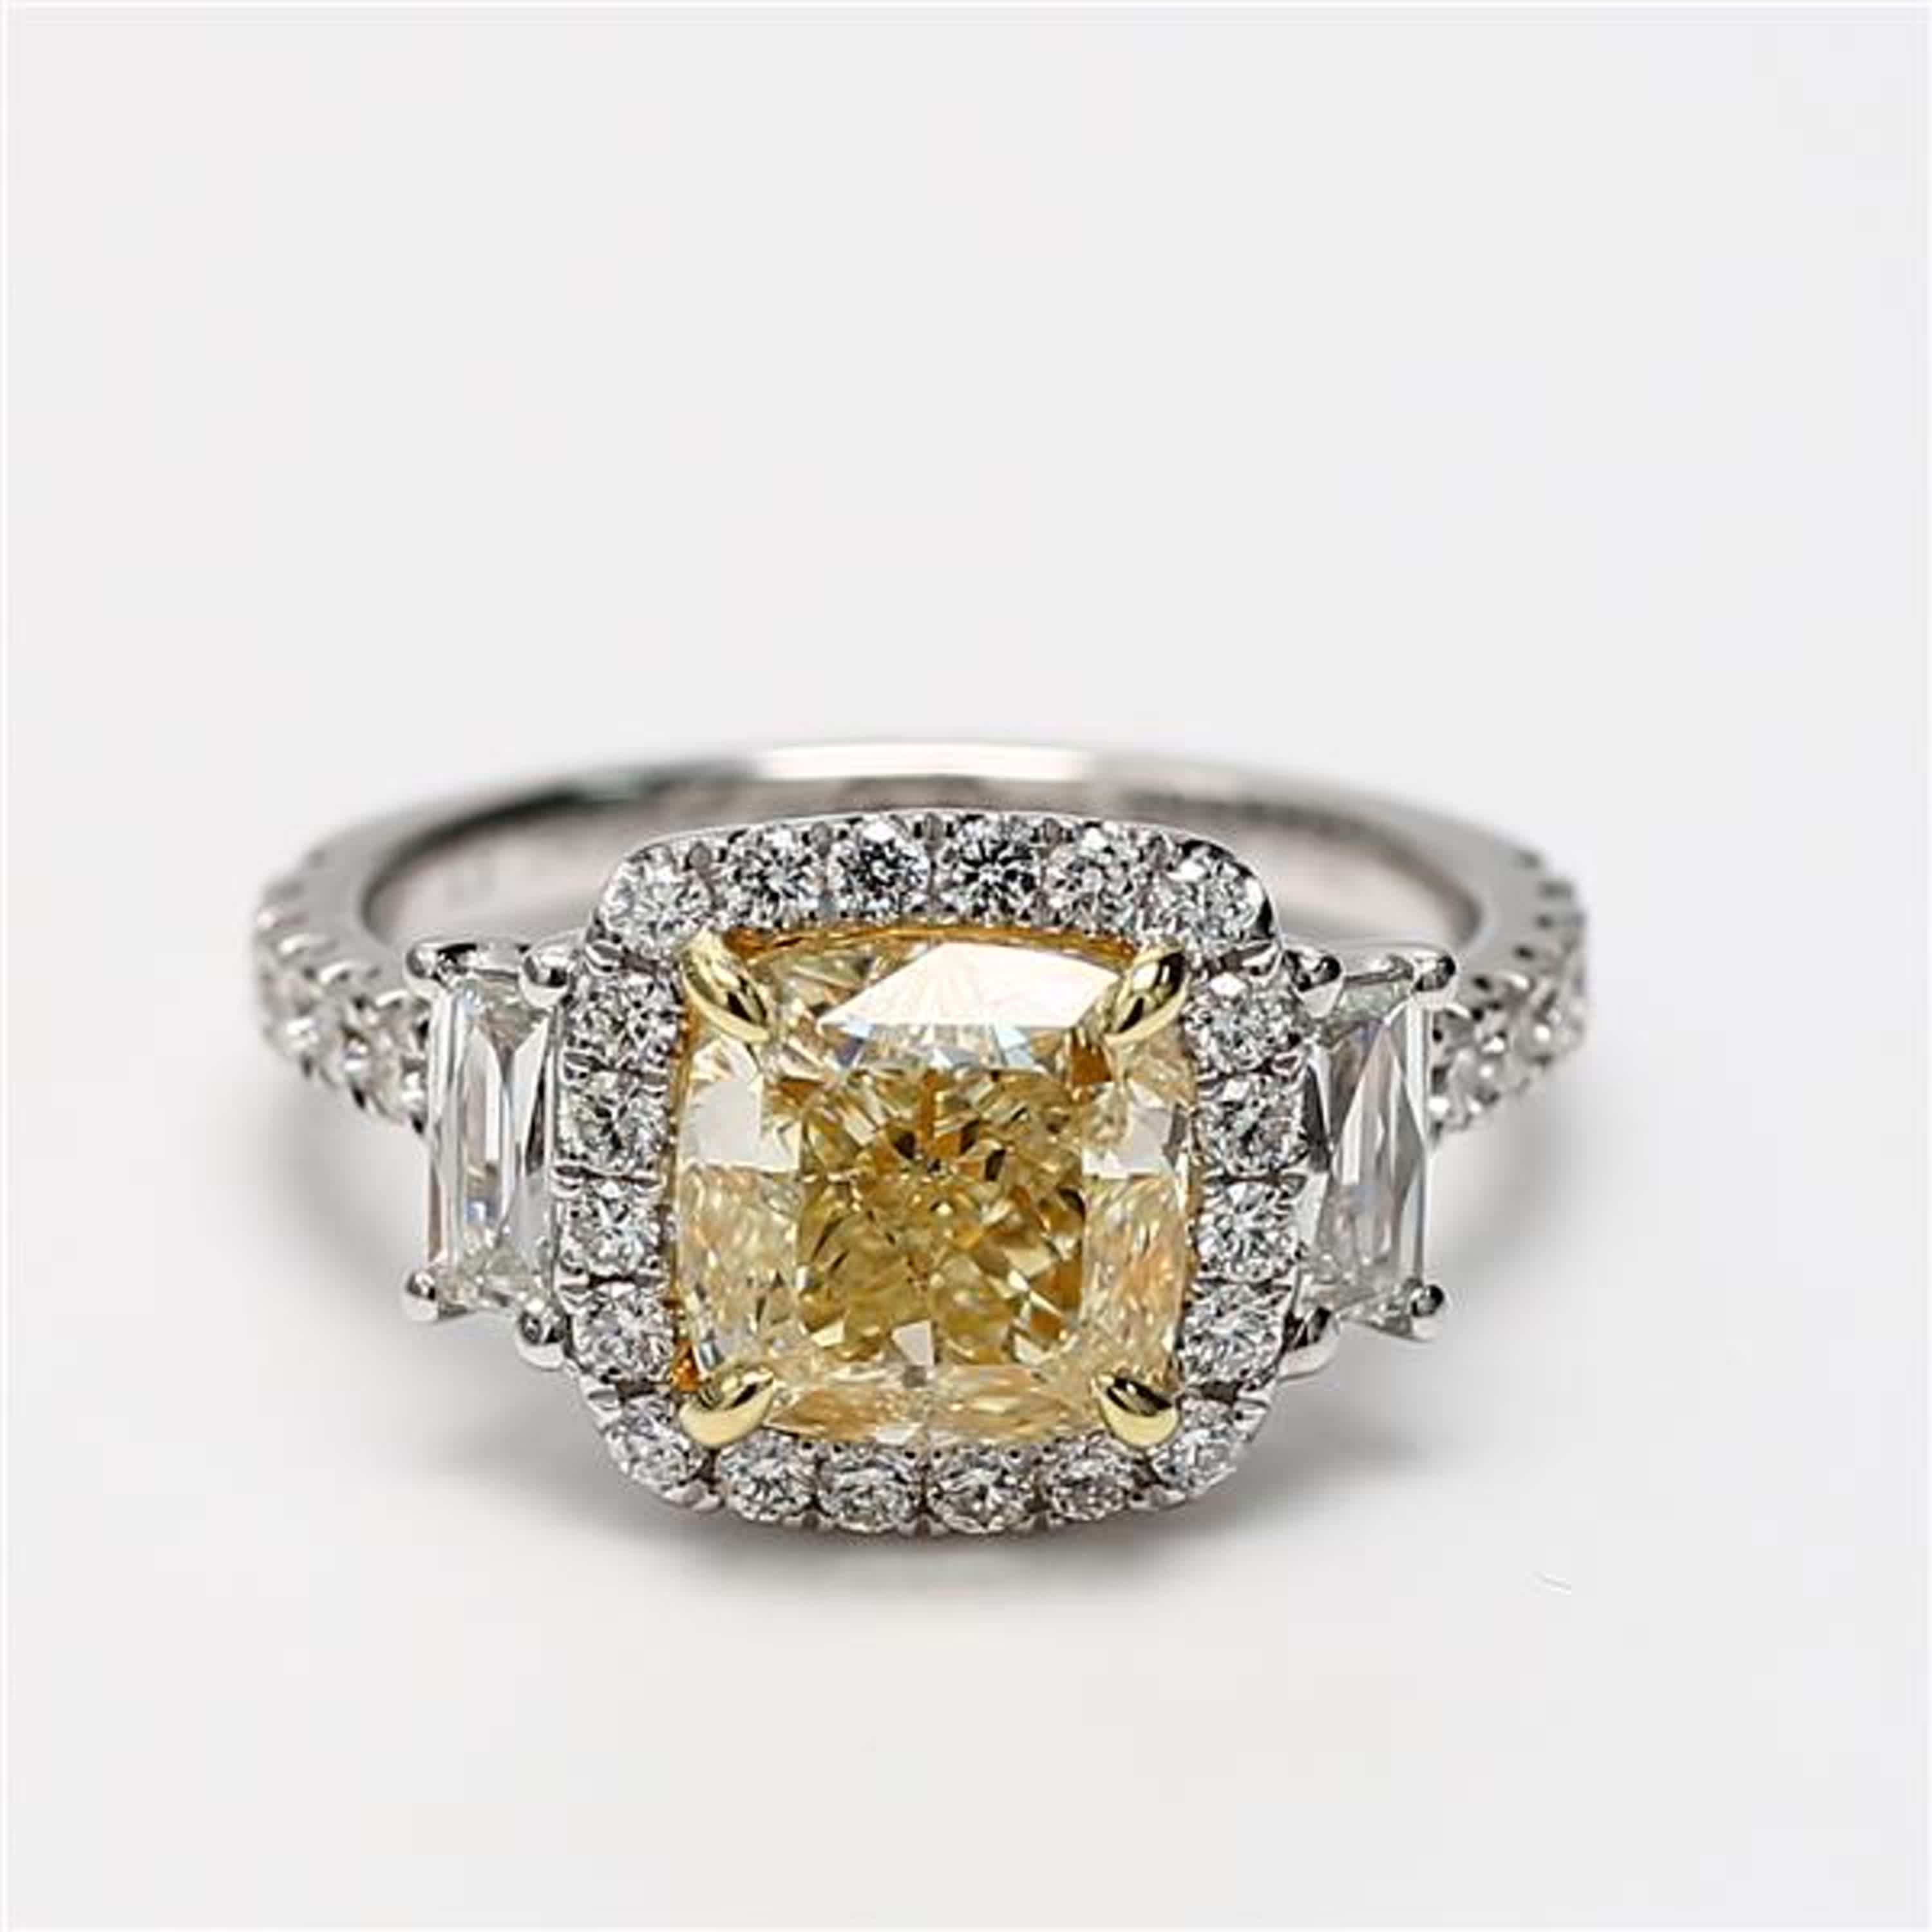 RareGemWorld's classic GIA certified diamond ring. Mounted in a beautiful 18K Yellow and White Gold setting with a natural cushion cut yellow diamond. The yellow diamond is surrounded by natural baguette white diamonds and round natural white